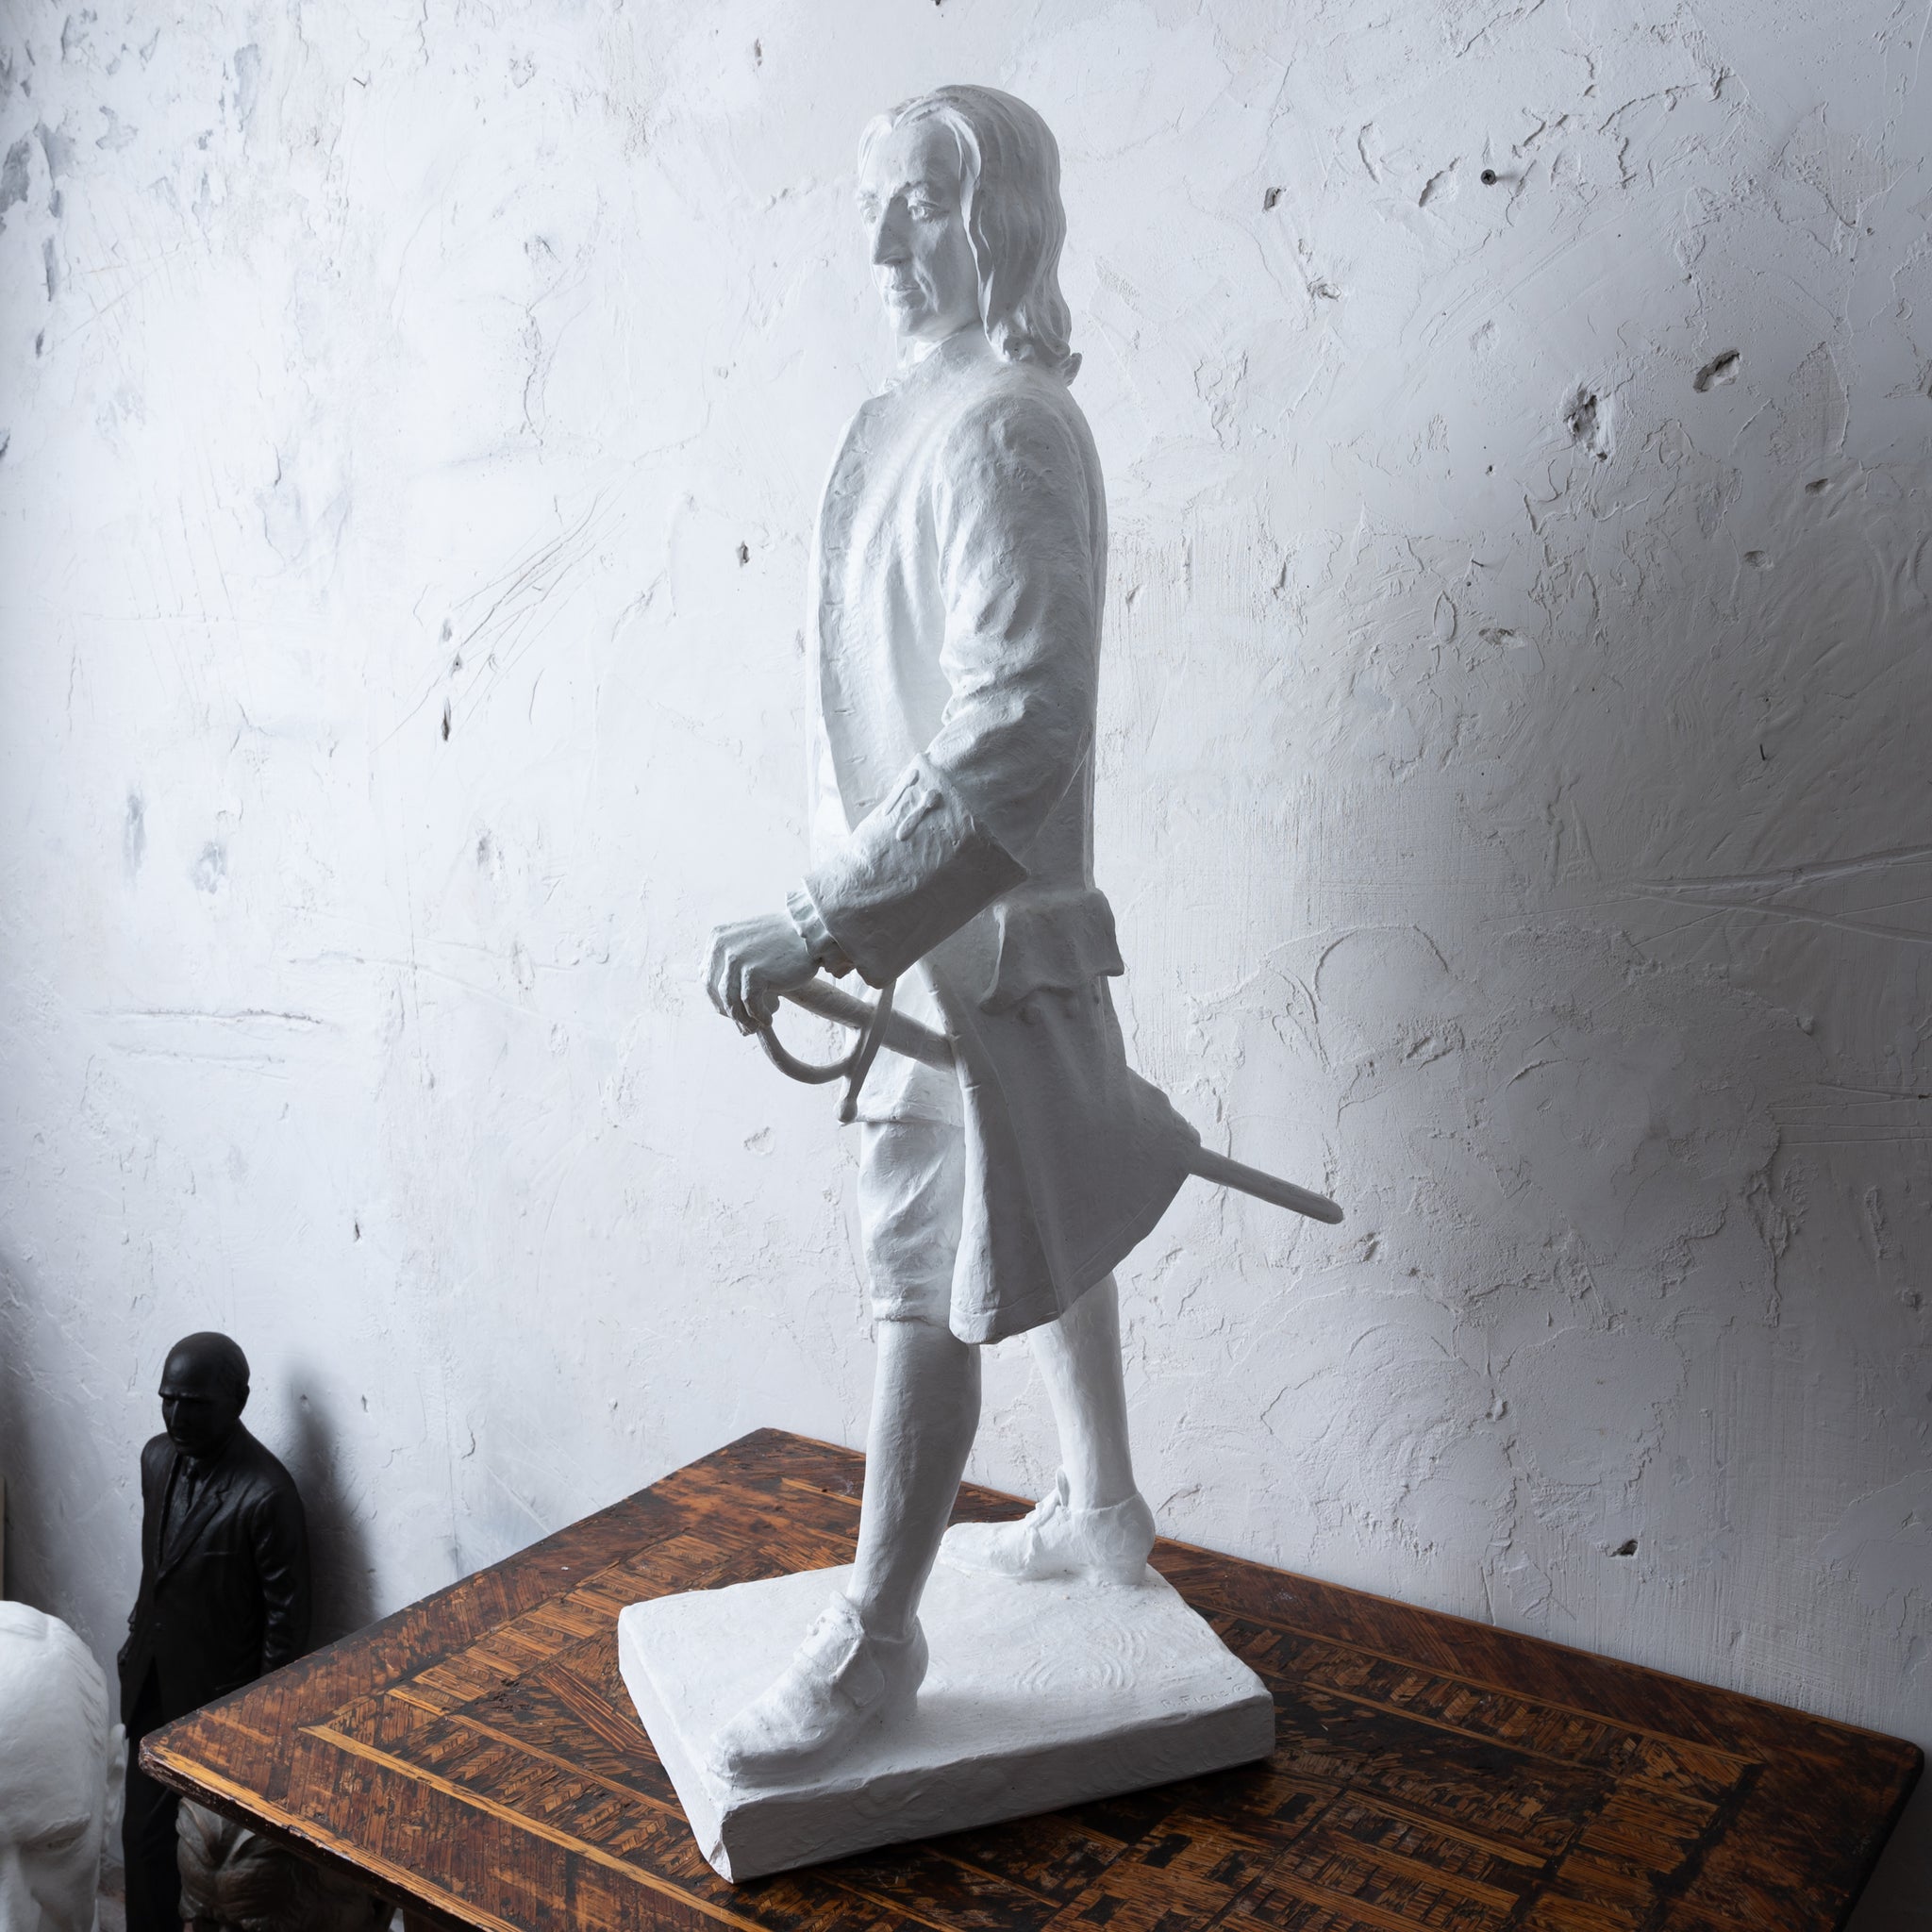 General James Oglethorpe Plaster Maquette by Rosario Russell Fiore